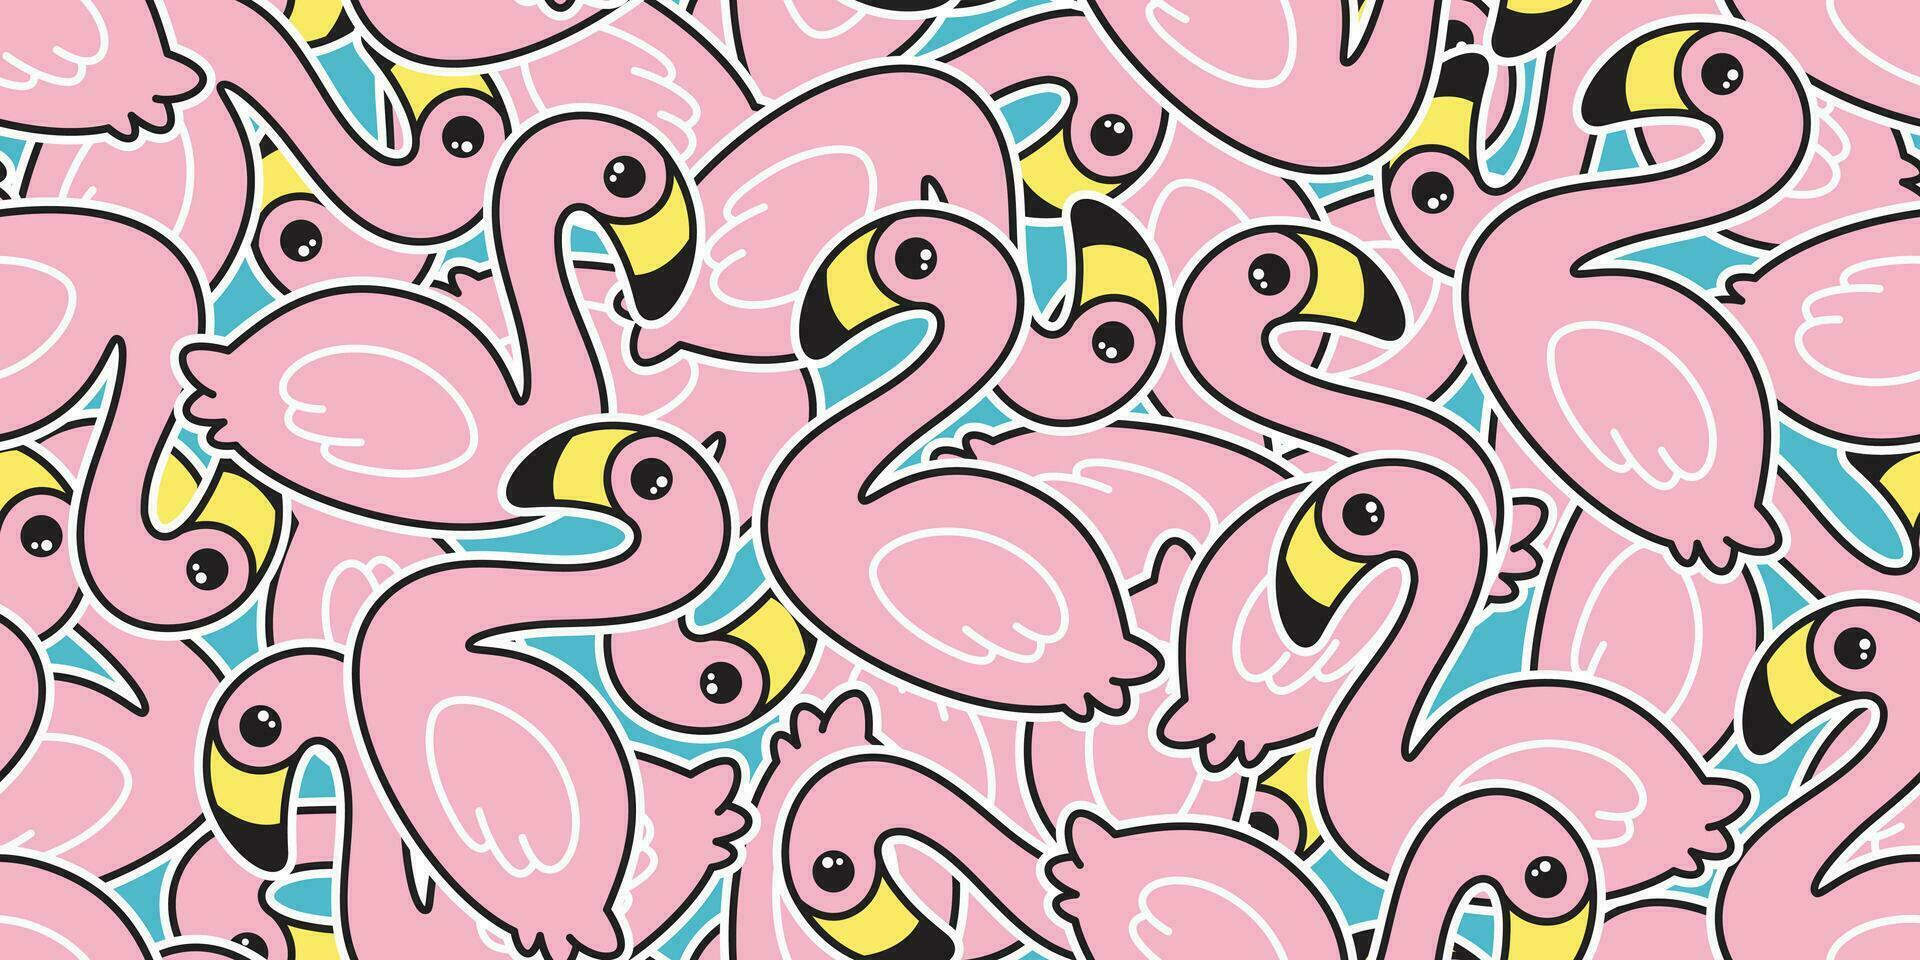 Flamingo seamless pattern vector pink Flamingos exotic bird summer tropical cartoon tile background repeat wallpaper scarf isolated illustration